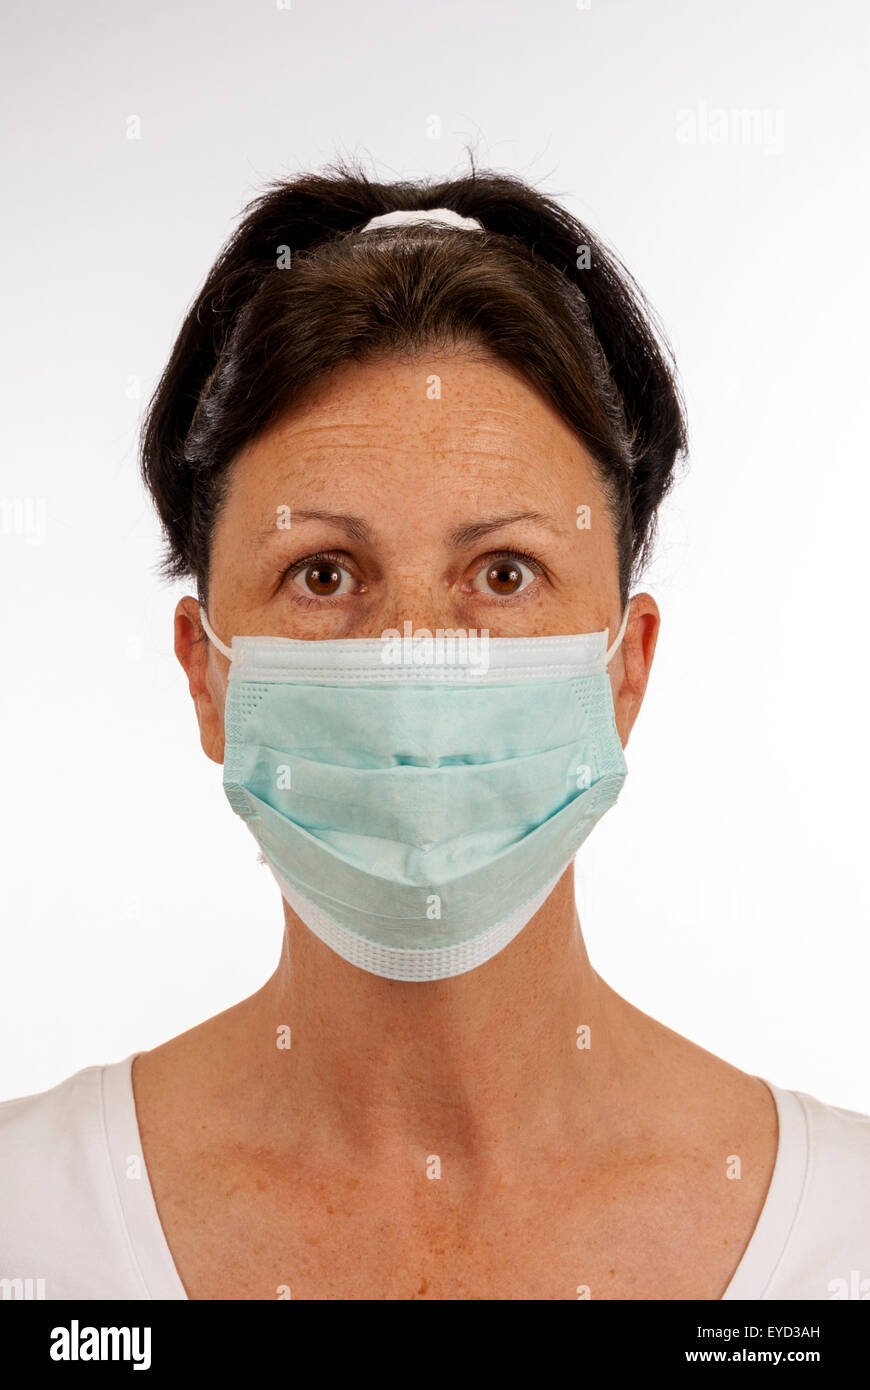 Protect Yourself From Germs.  Wear a protective mask. On white background Stock Photo